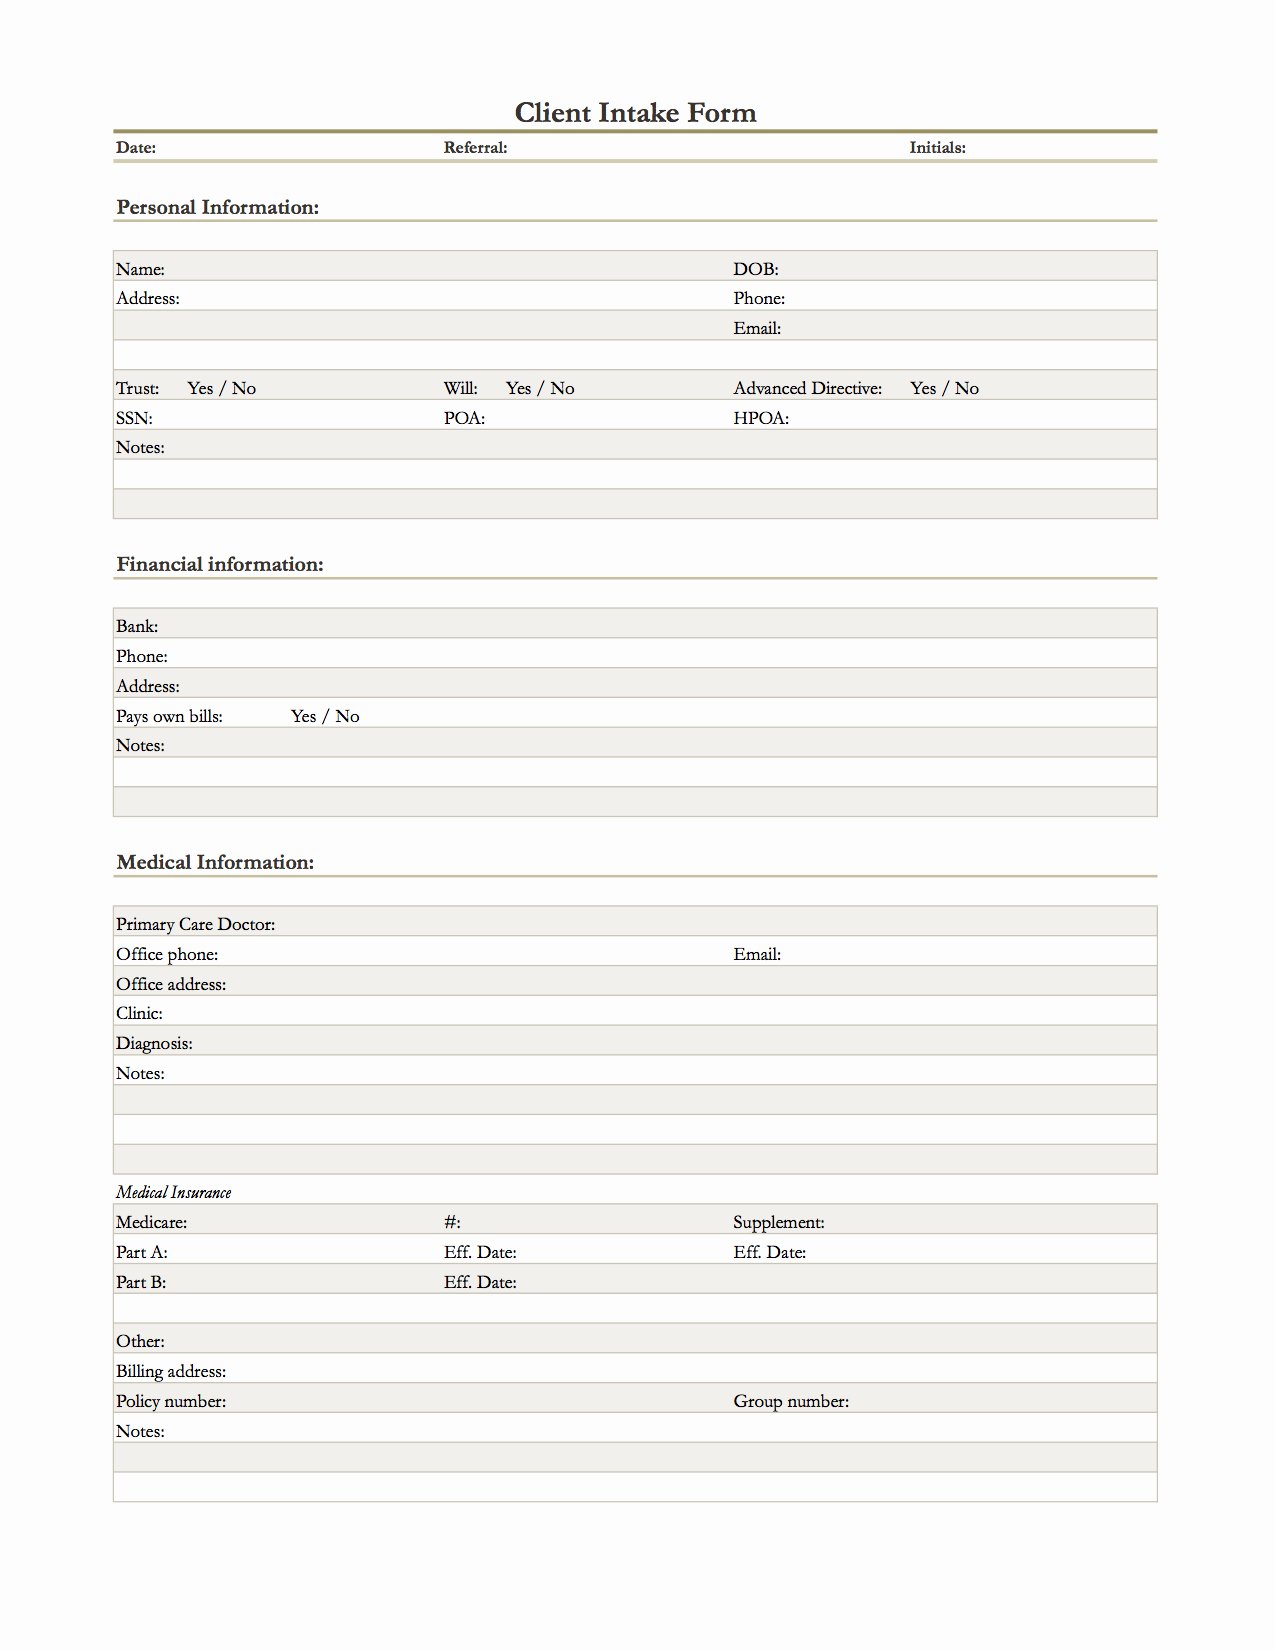 Client Information form Template Awesome Operational Templates.